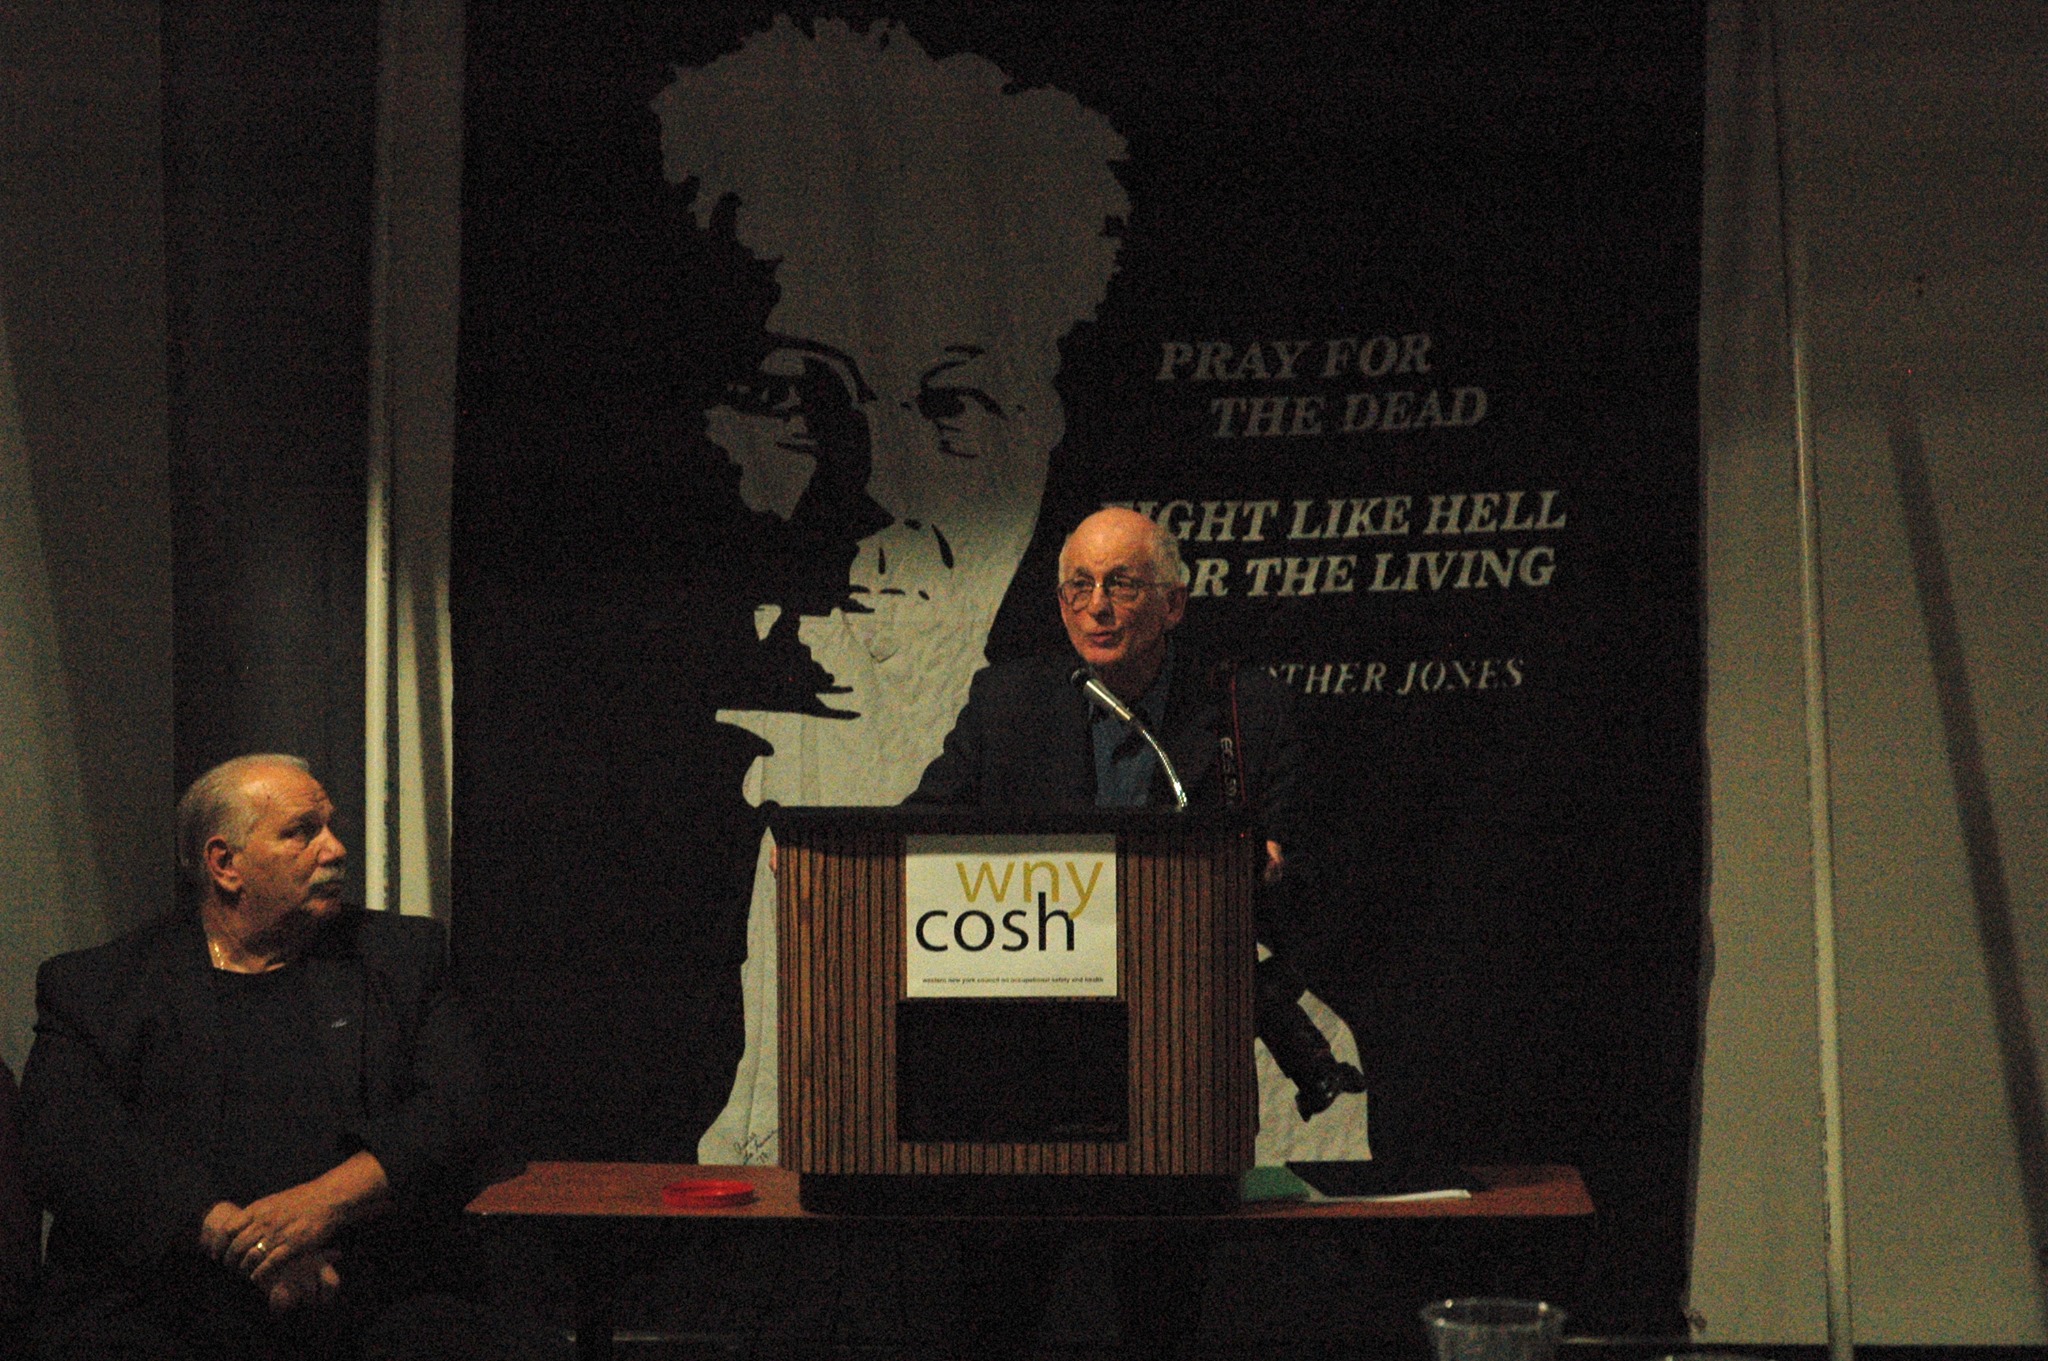 Earl Dotter, photographer, speaking at a WNYCOSH event